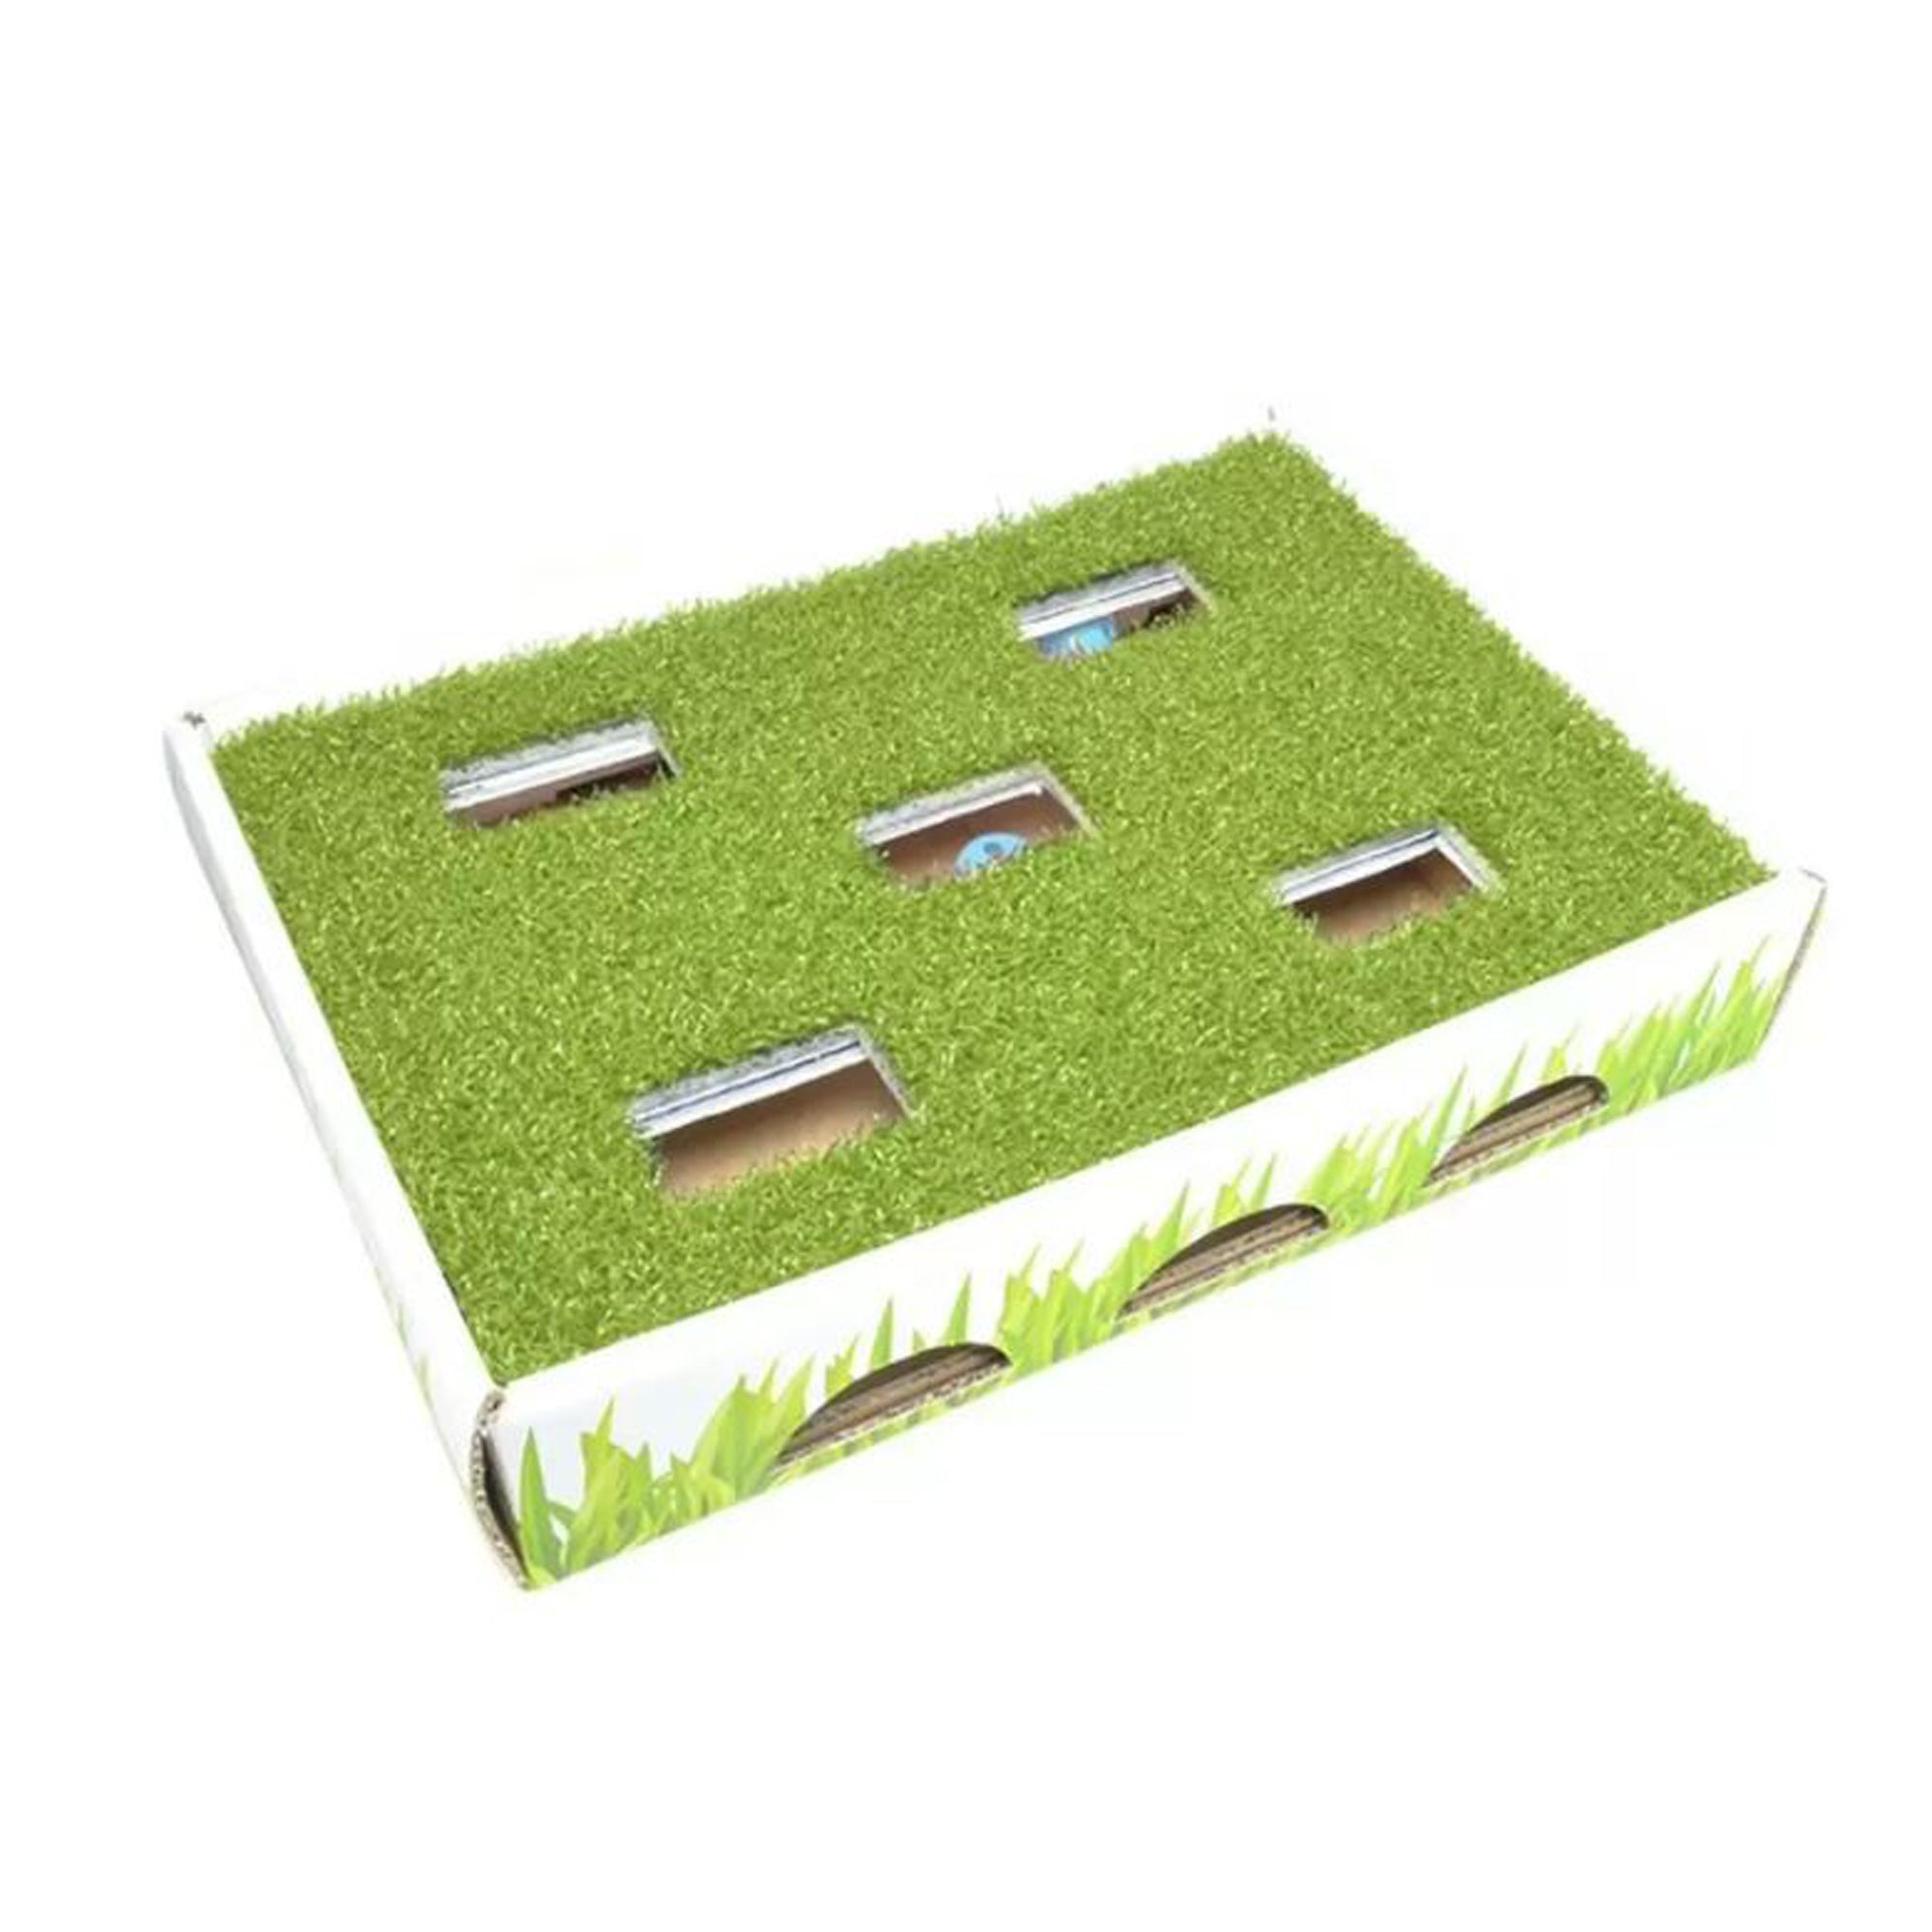 Petstages Grass Patch Hunting Box Cat Toy White, Green One Size